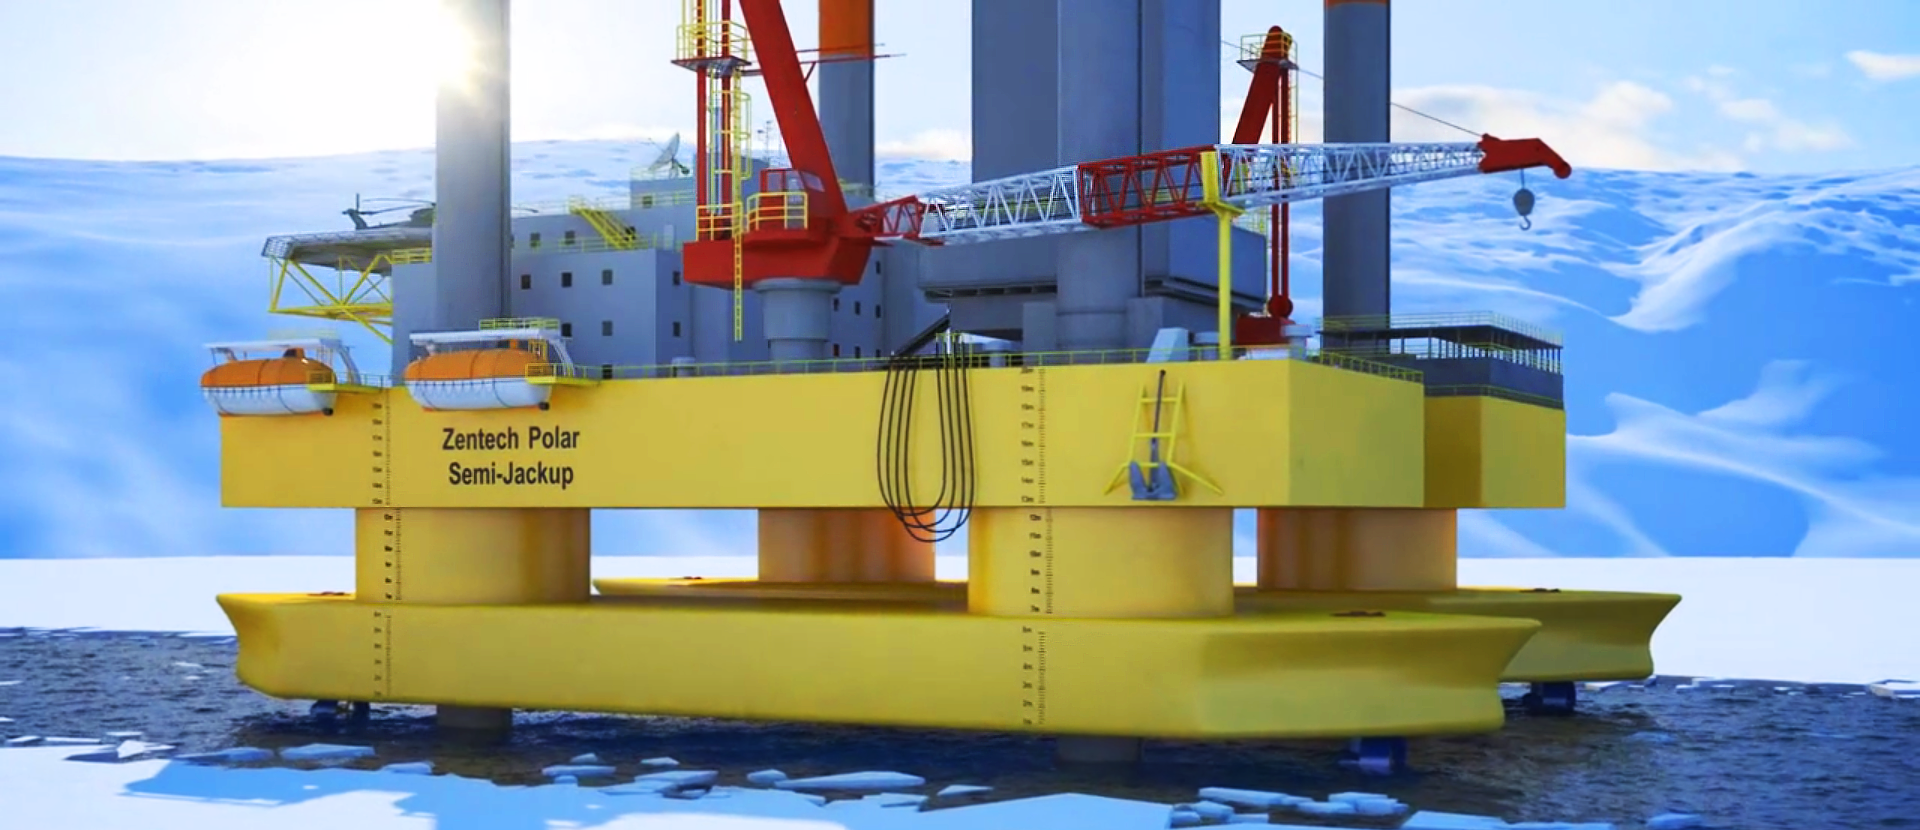 This is a 3D rendered image of the Zentech Polar Semi-Jackup during Trinity's animation demonstrating offshore technology. This is a ground image of the Oil Rig with the sun gleaming from behind it. The glaciers are displayed in the background.